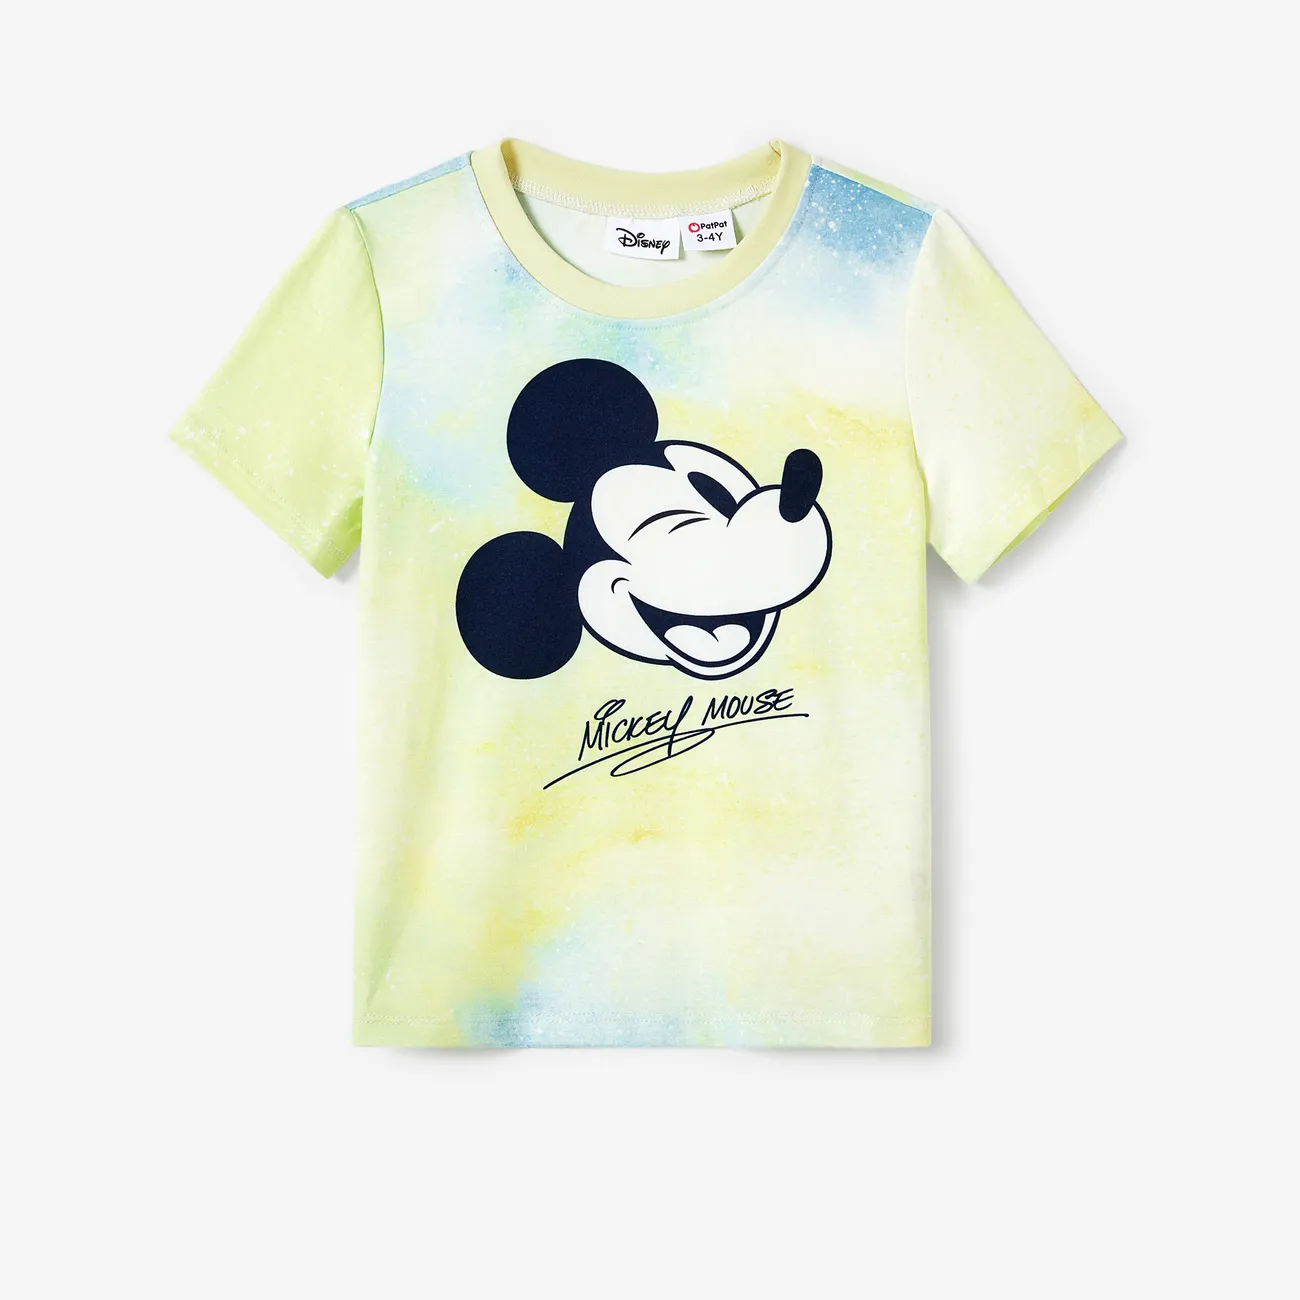 Disney Mickey and Friends Muttertag Familien-Looks Tanktop Familien-Outfits Sets Mehrfarbig big image 1